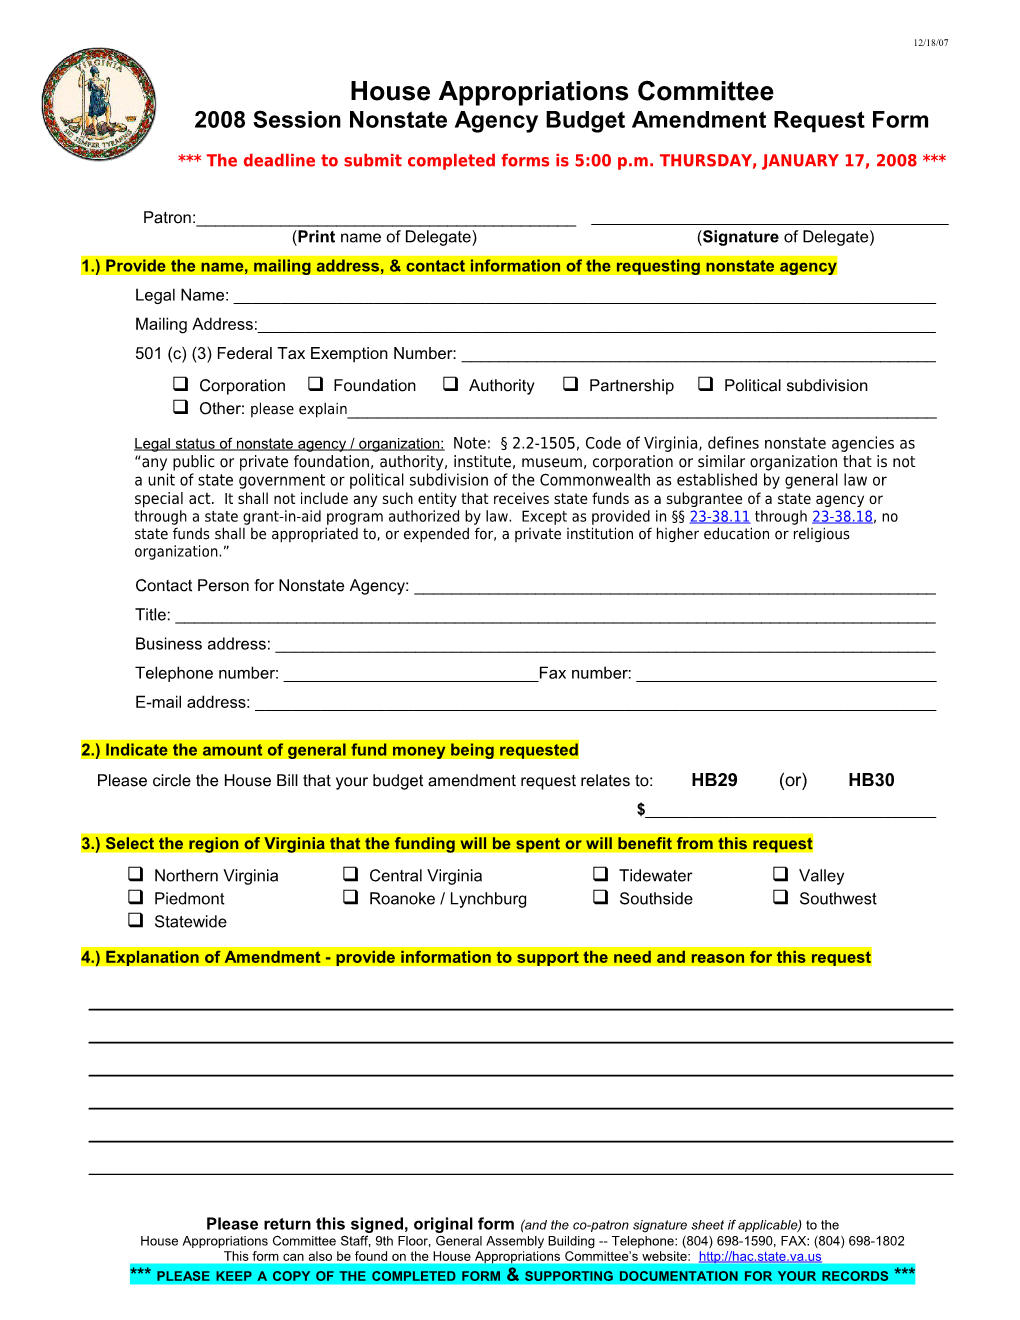 2008 Session Nonstate Agency Budget Amendment Request Form